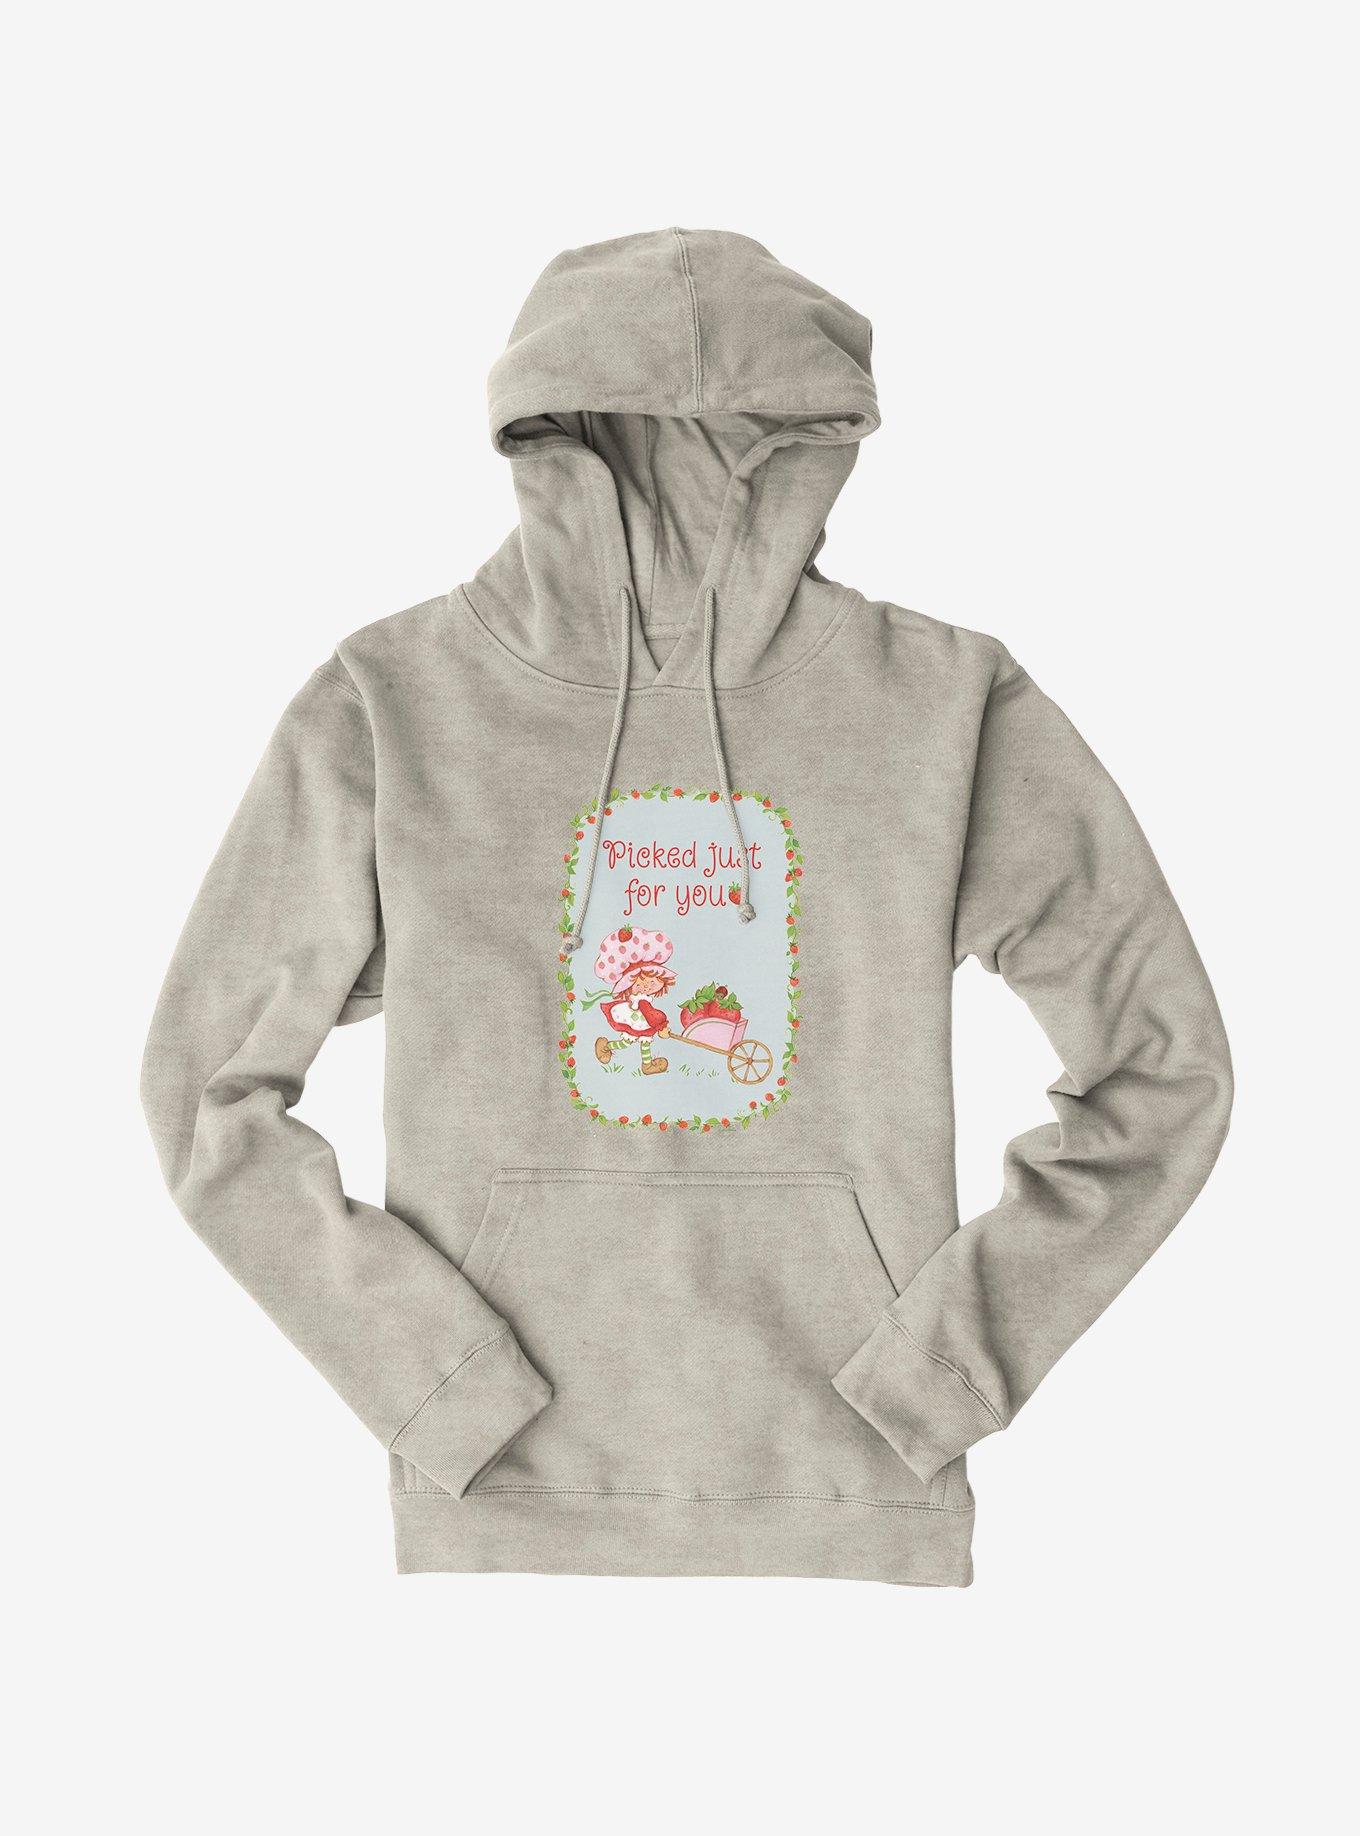 Strawberry Shortcake Picked Just For You Hoodie